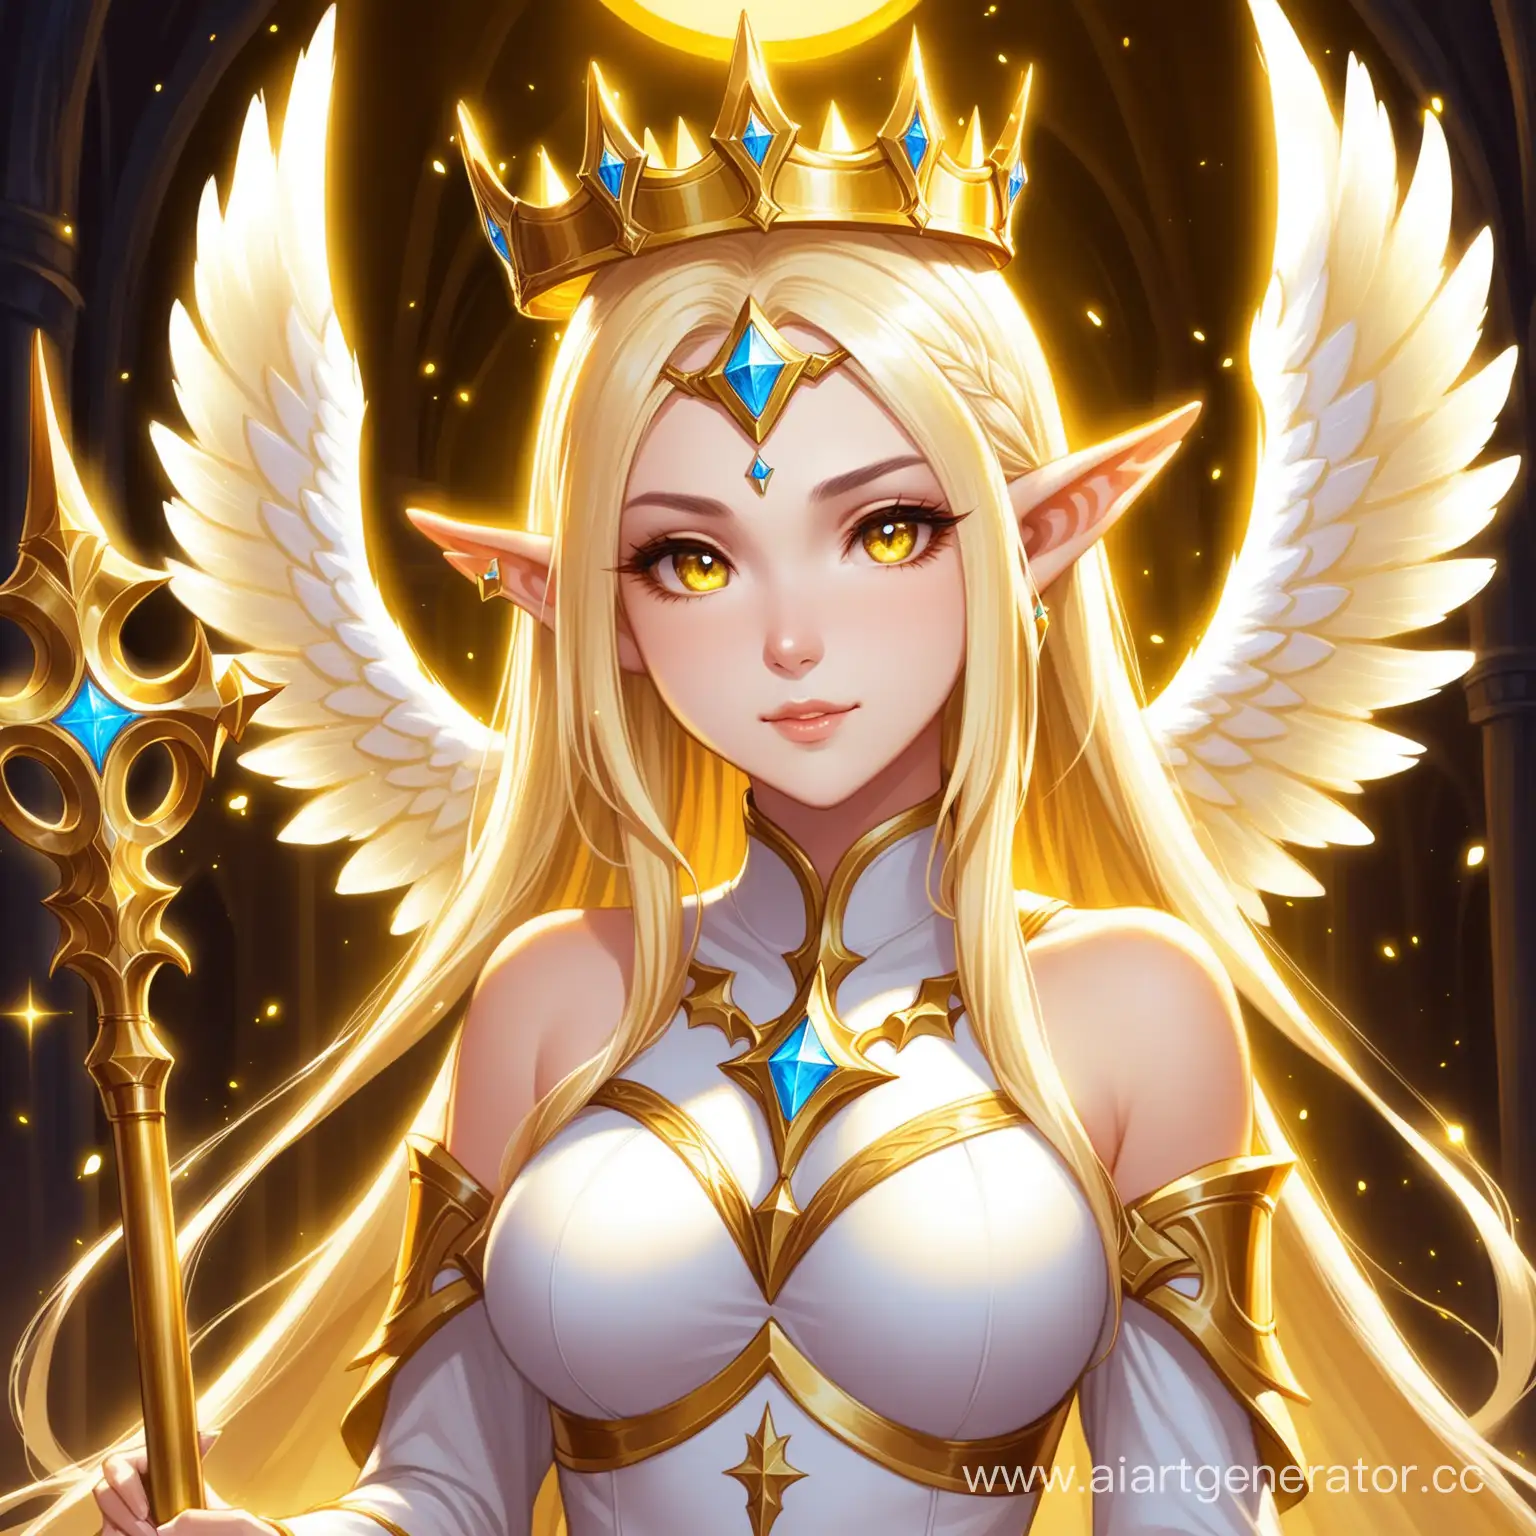 girl night elf from the game World of Warcraft. she is a Priest, she wears a white thin tight dress with gold embossing, on her head a golden crown, in her hands a golden scepter with angelic wings, behind her angel wings, her hair is white, her eyes are yellow, she resembles a goddess or an angel. 